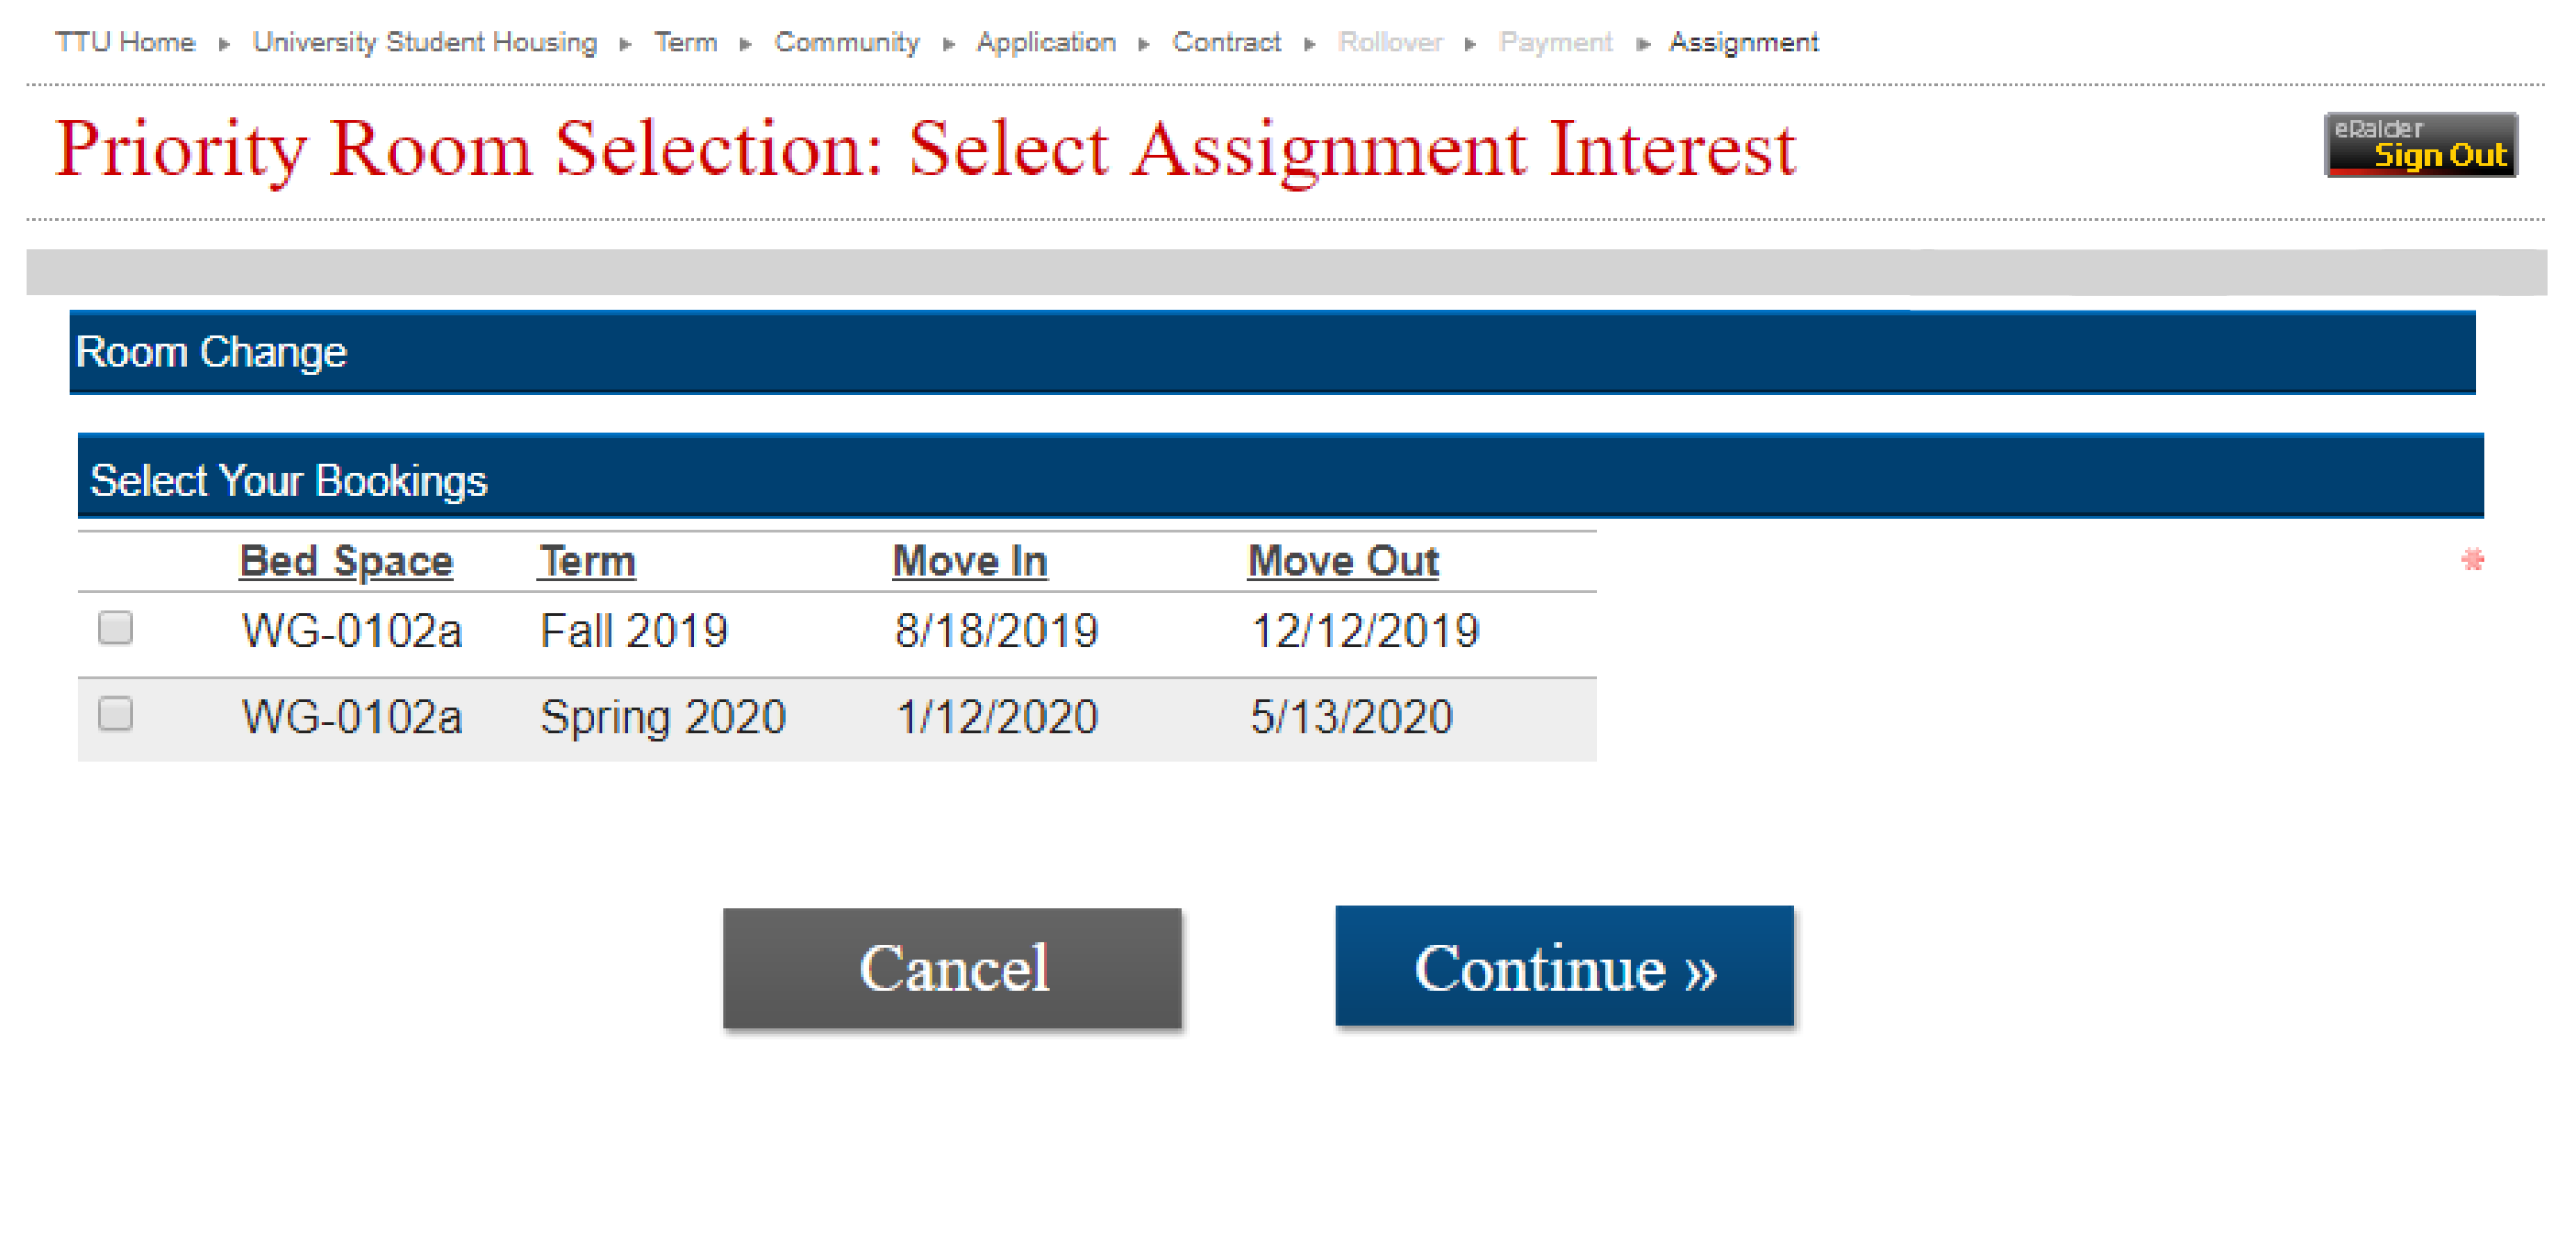 Priority Room Selection: Select Assignment Interest